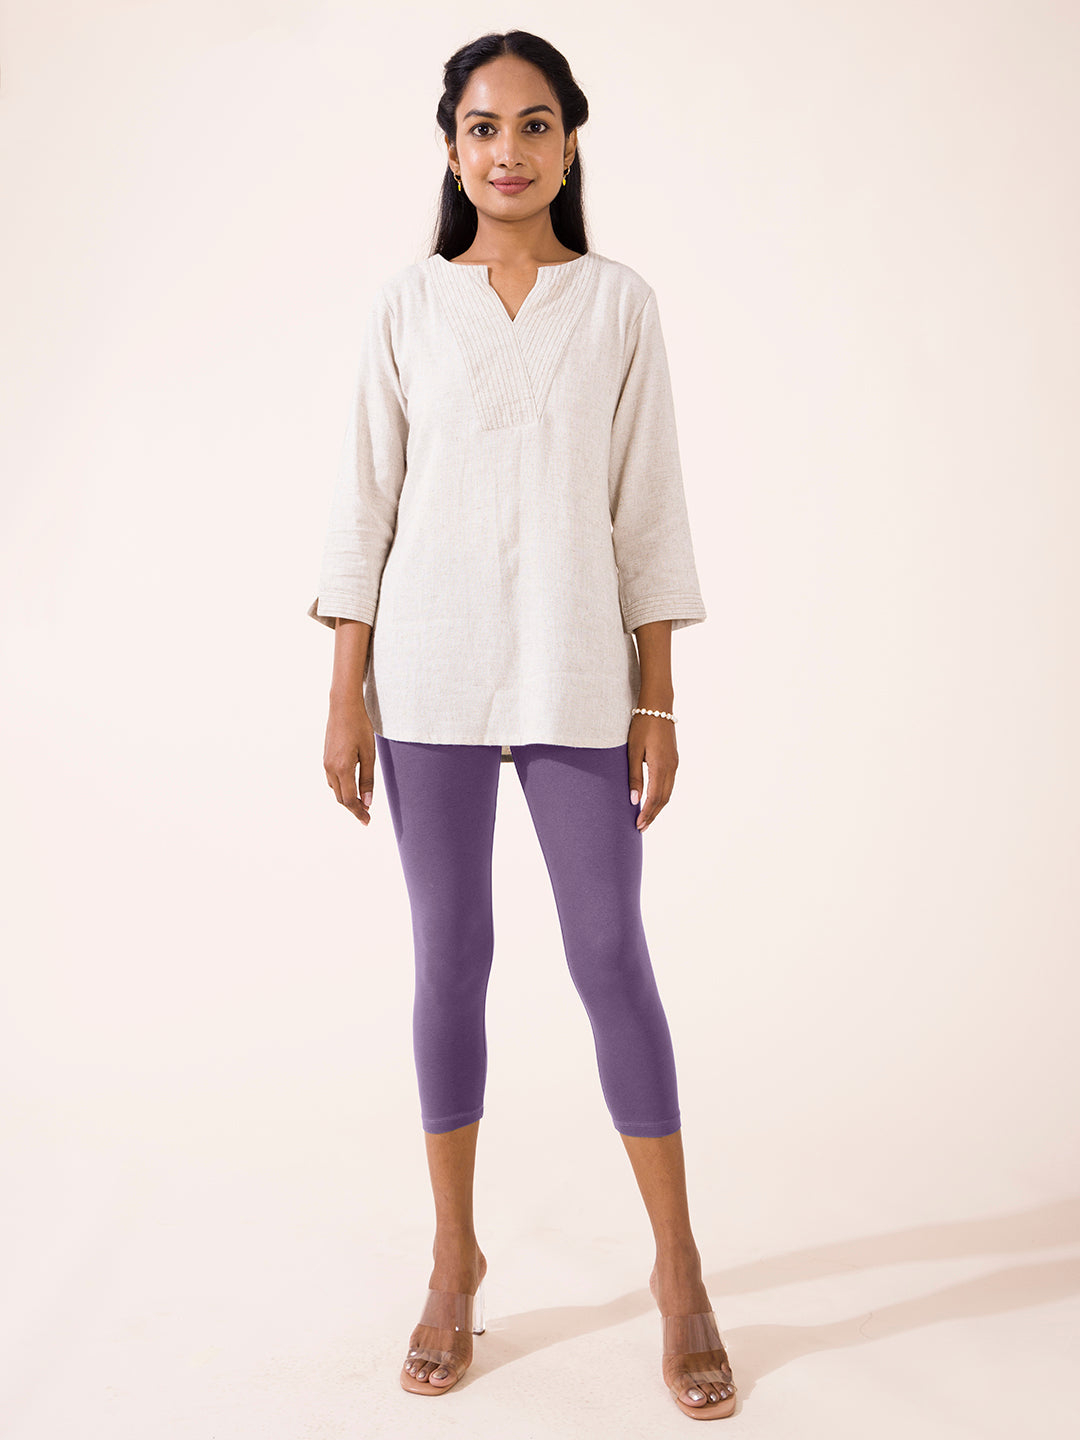 LOGO Layers by Lori Goldstein Regular Crop Leggings with Lace - QVC.com